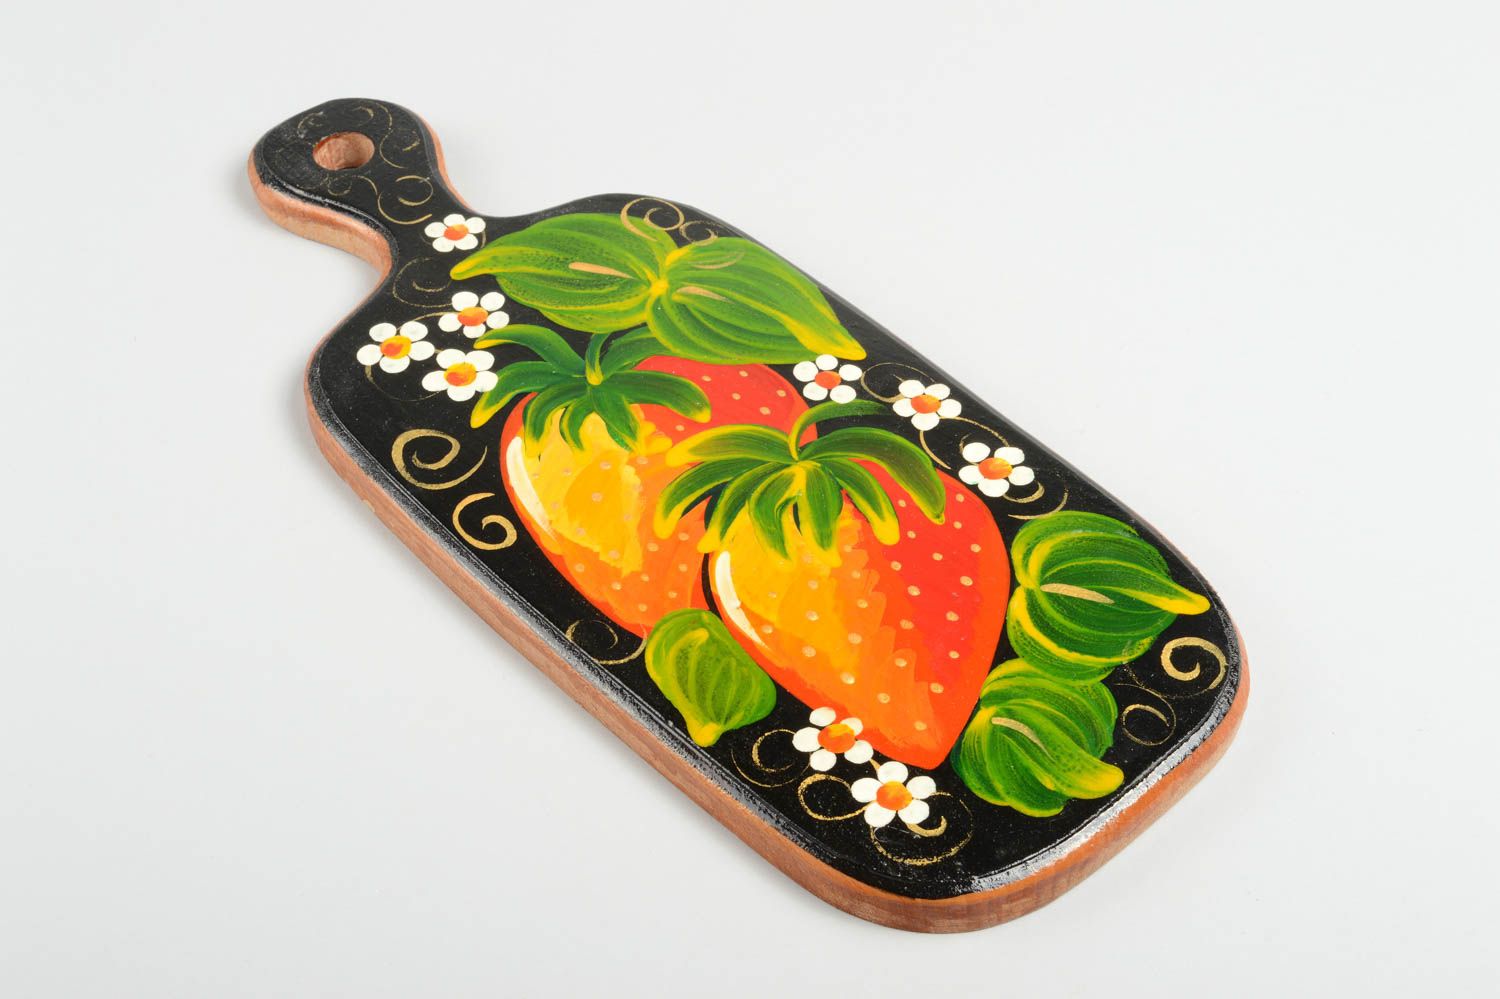 Lovely cutting board beautiful designer accessories stylish decorative use only photo 3